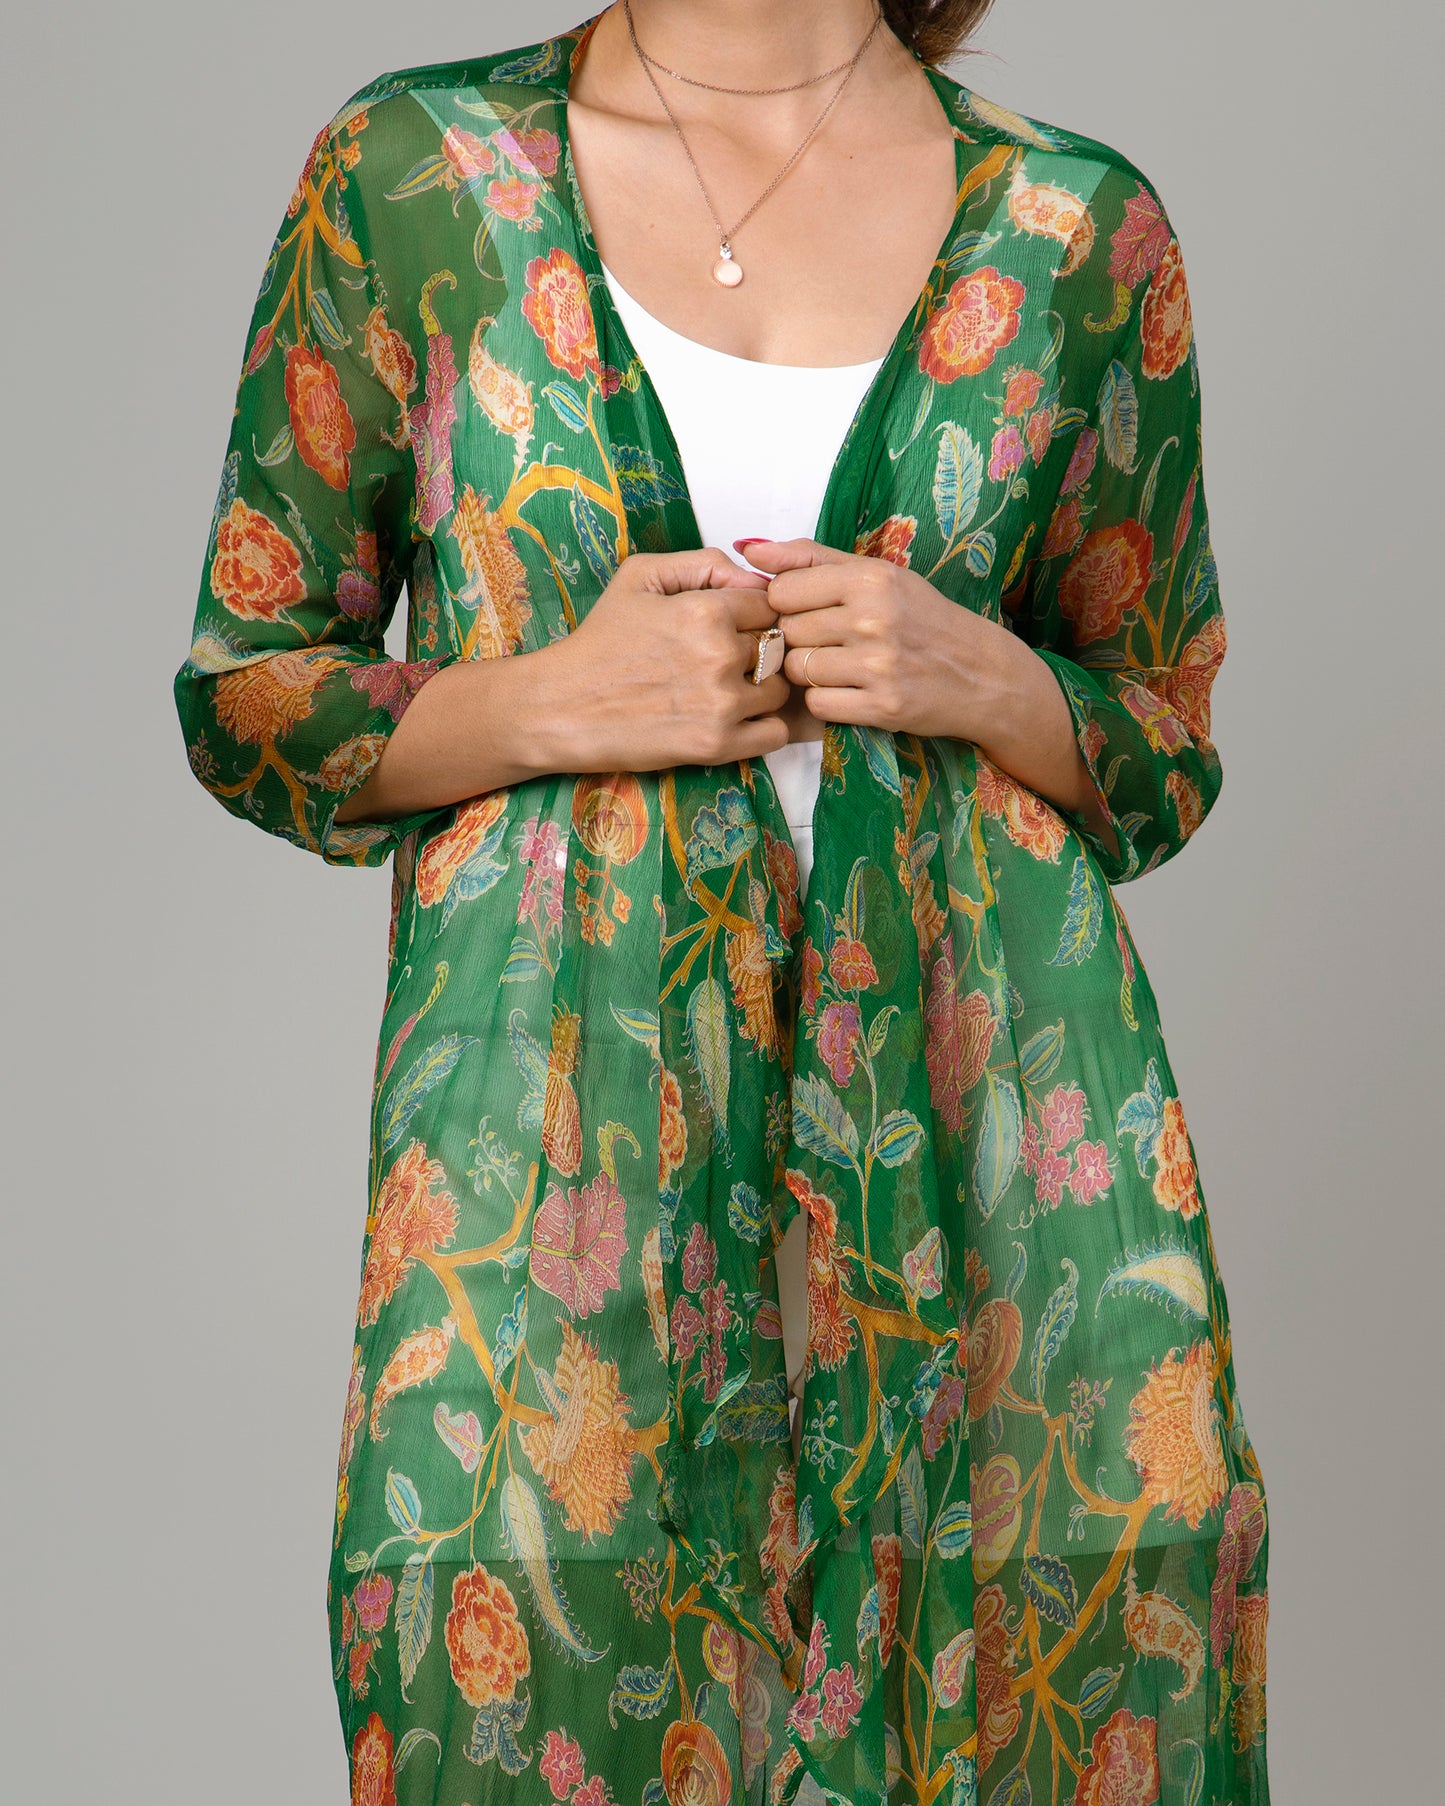 Vintage Floral Waterfall Shrug For Women